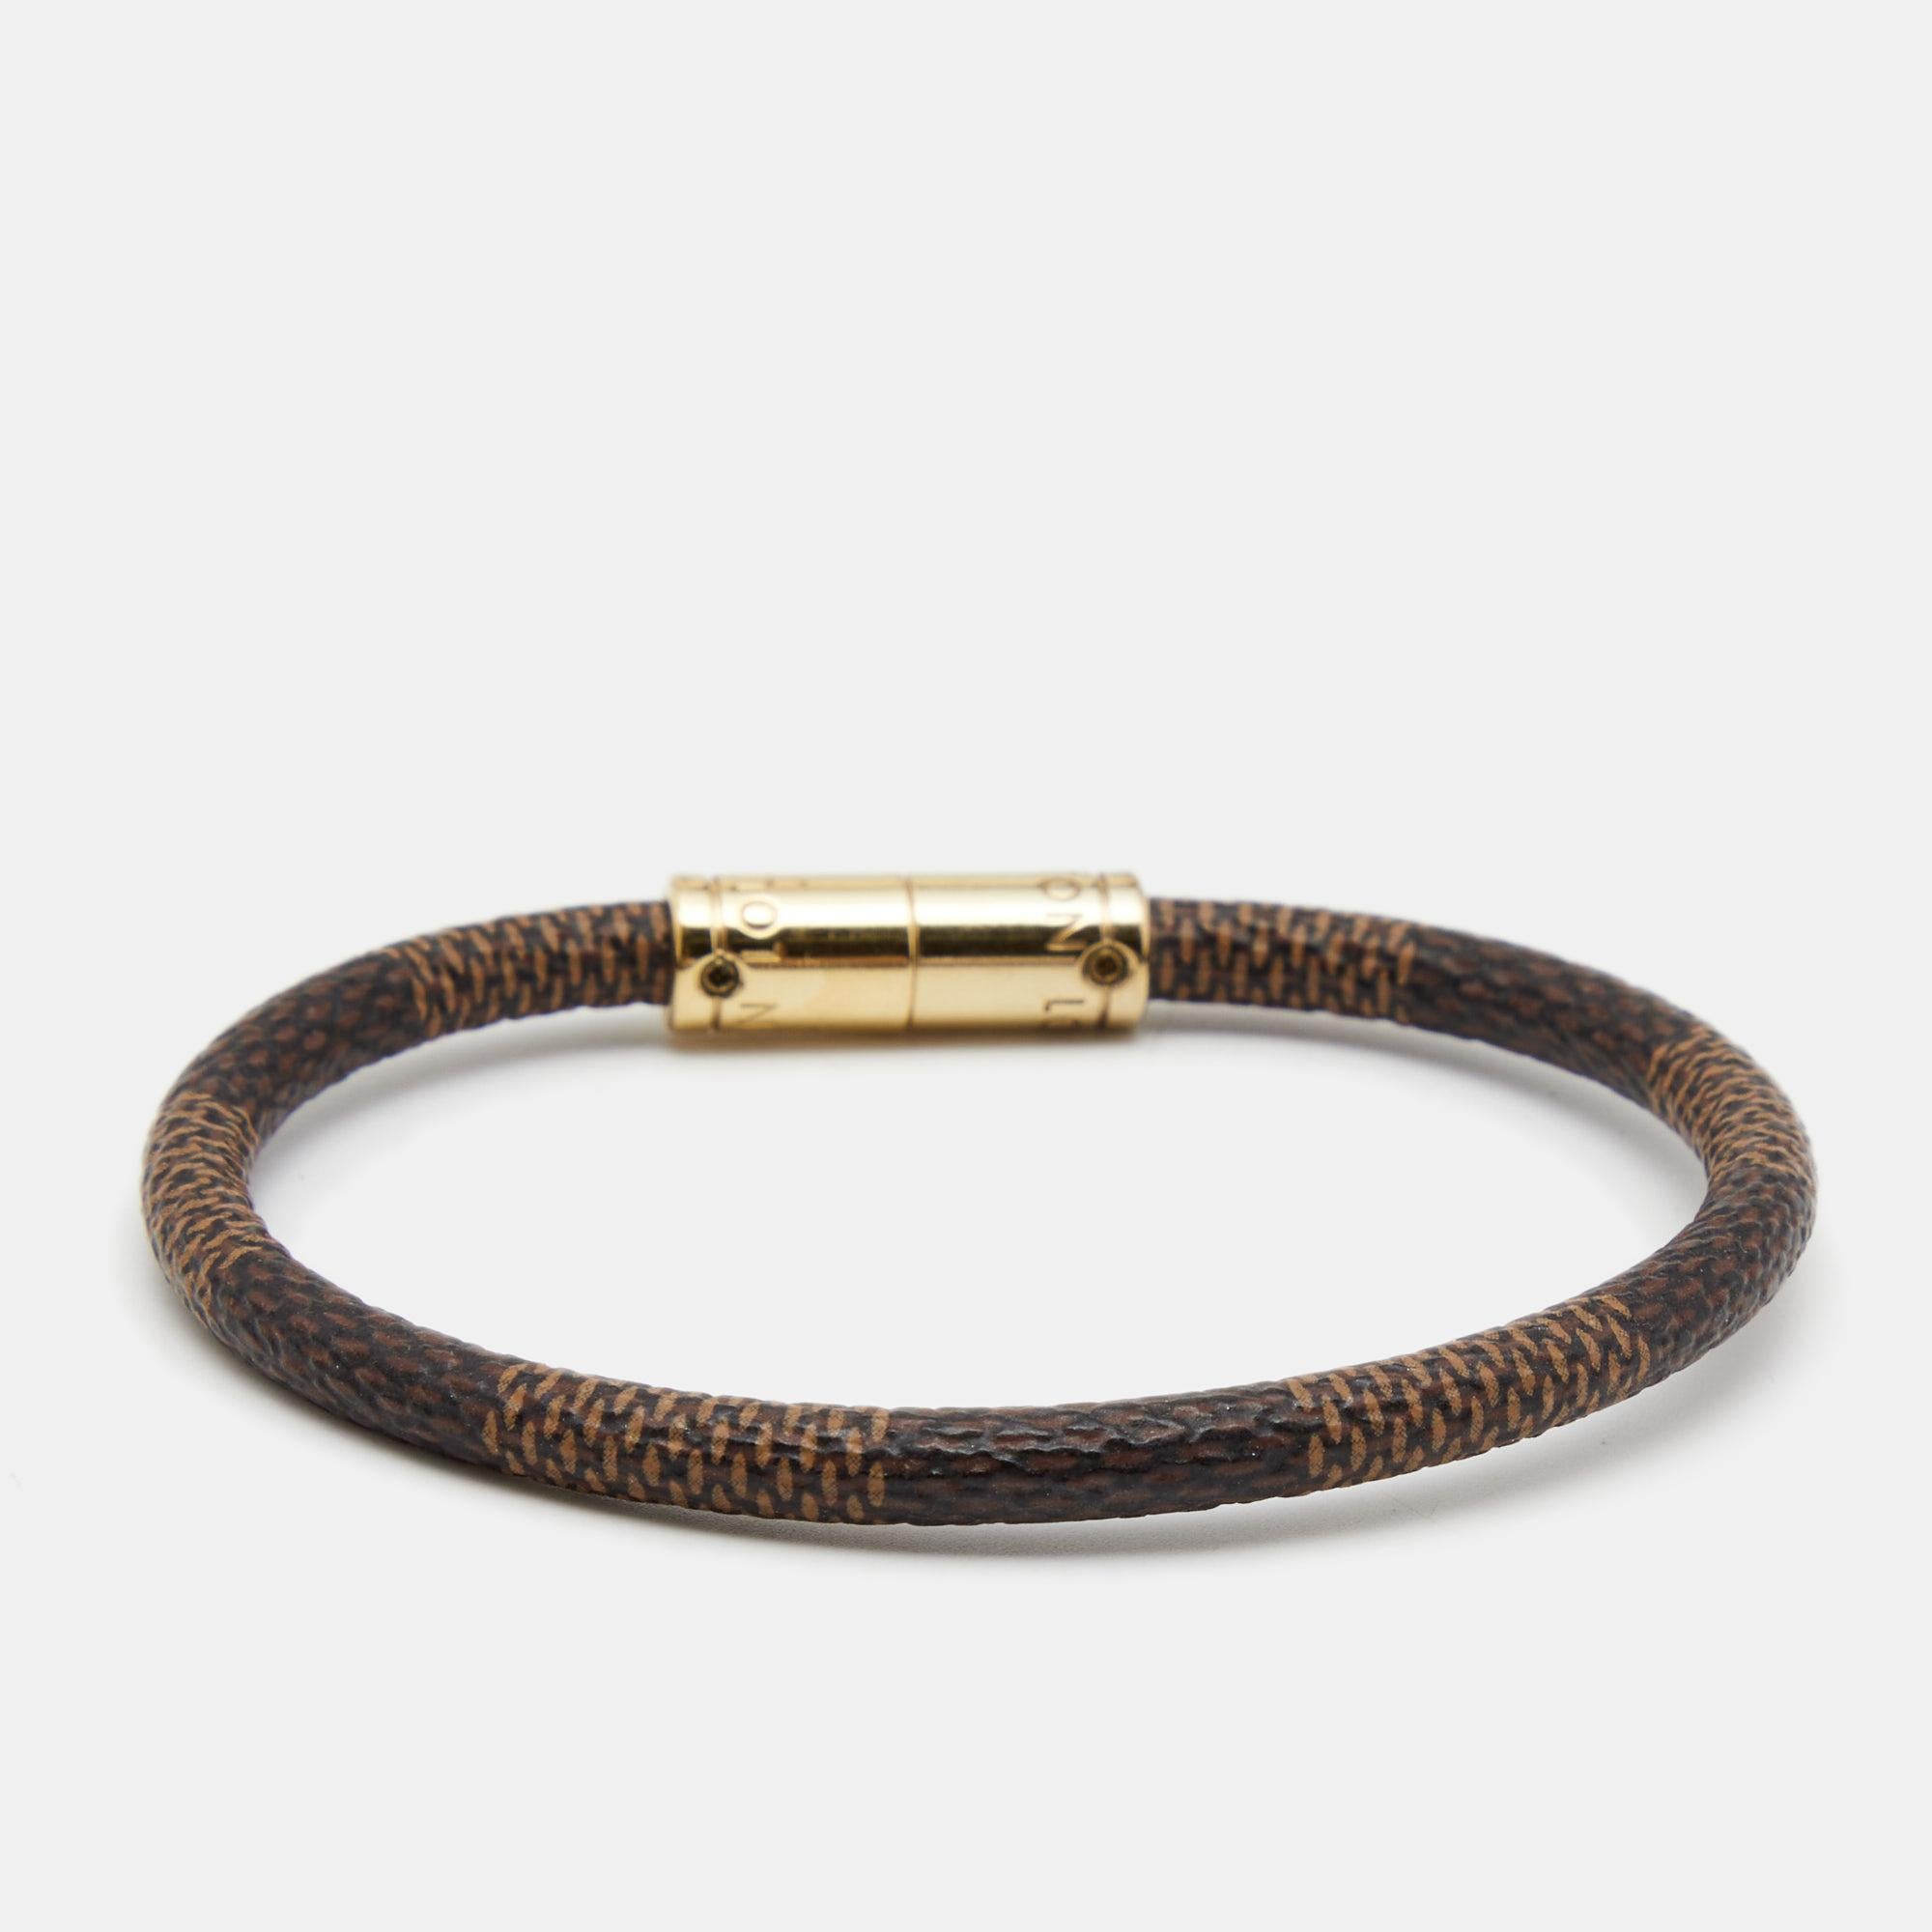 Simple yet elegant, this 'Keep It' bracelet is designed with the label's signature Damier Graphite canvas body and features a gold-tone centre. Wear it as a stand-alone piece or stack it with similar bands for a more edgy feel.

